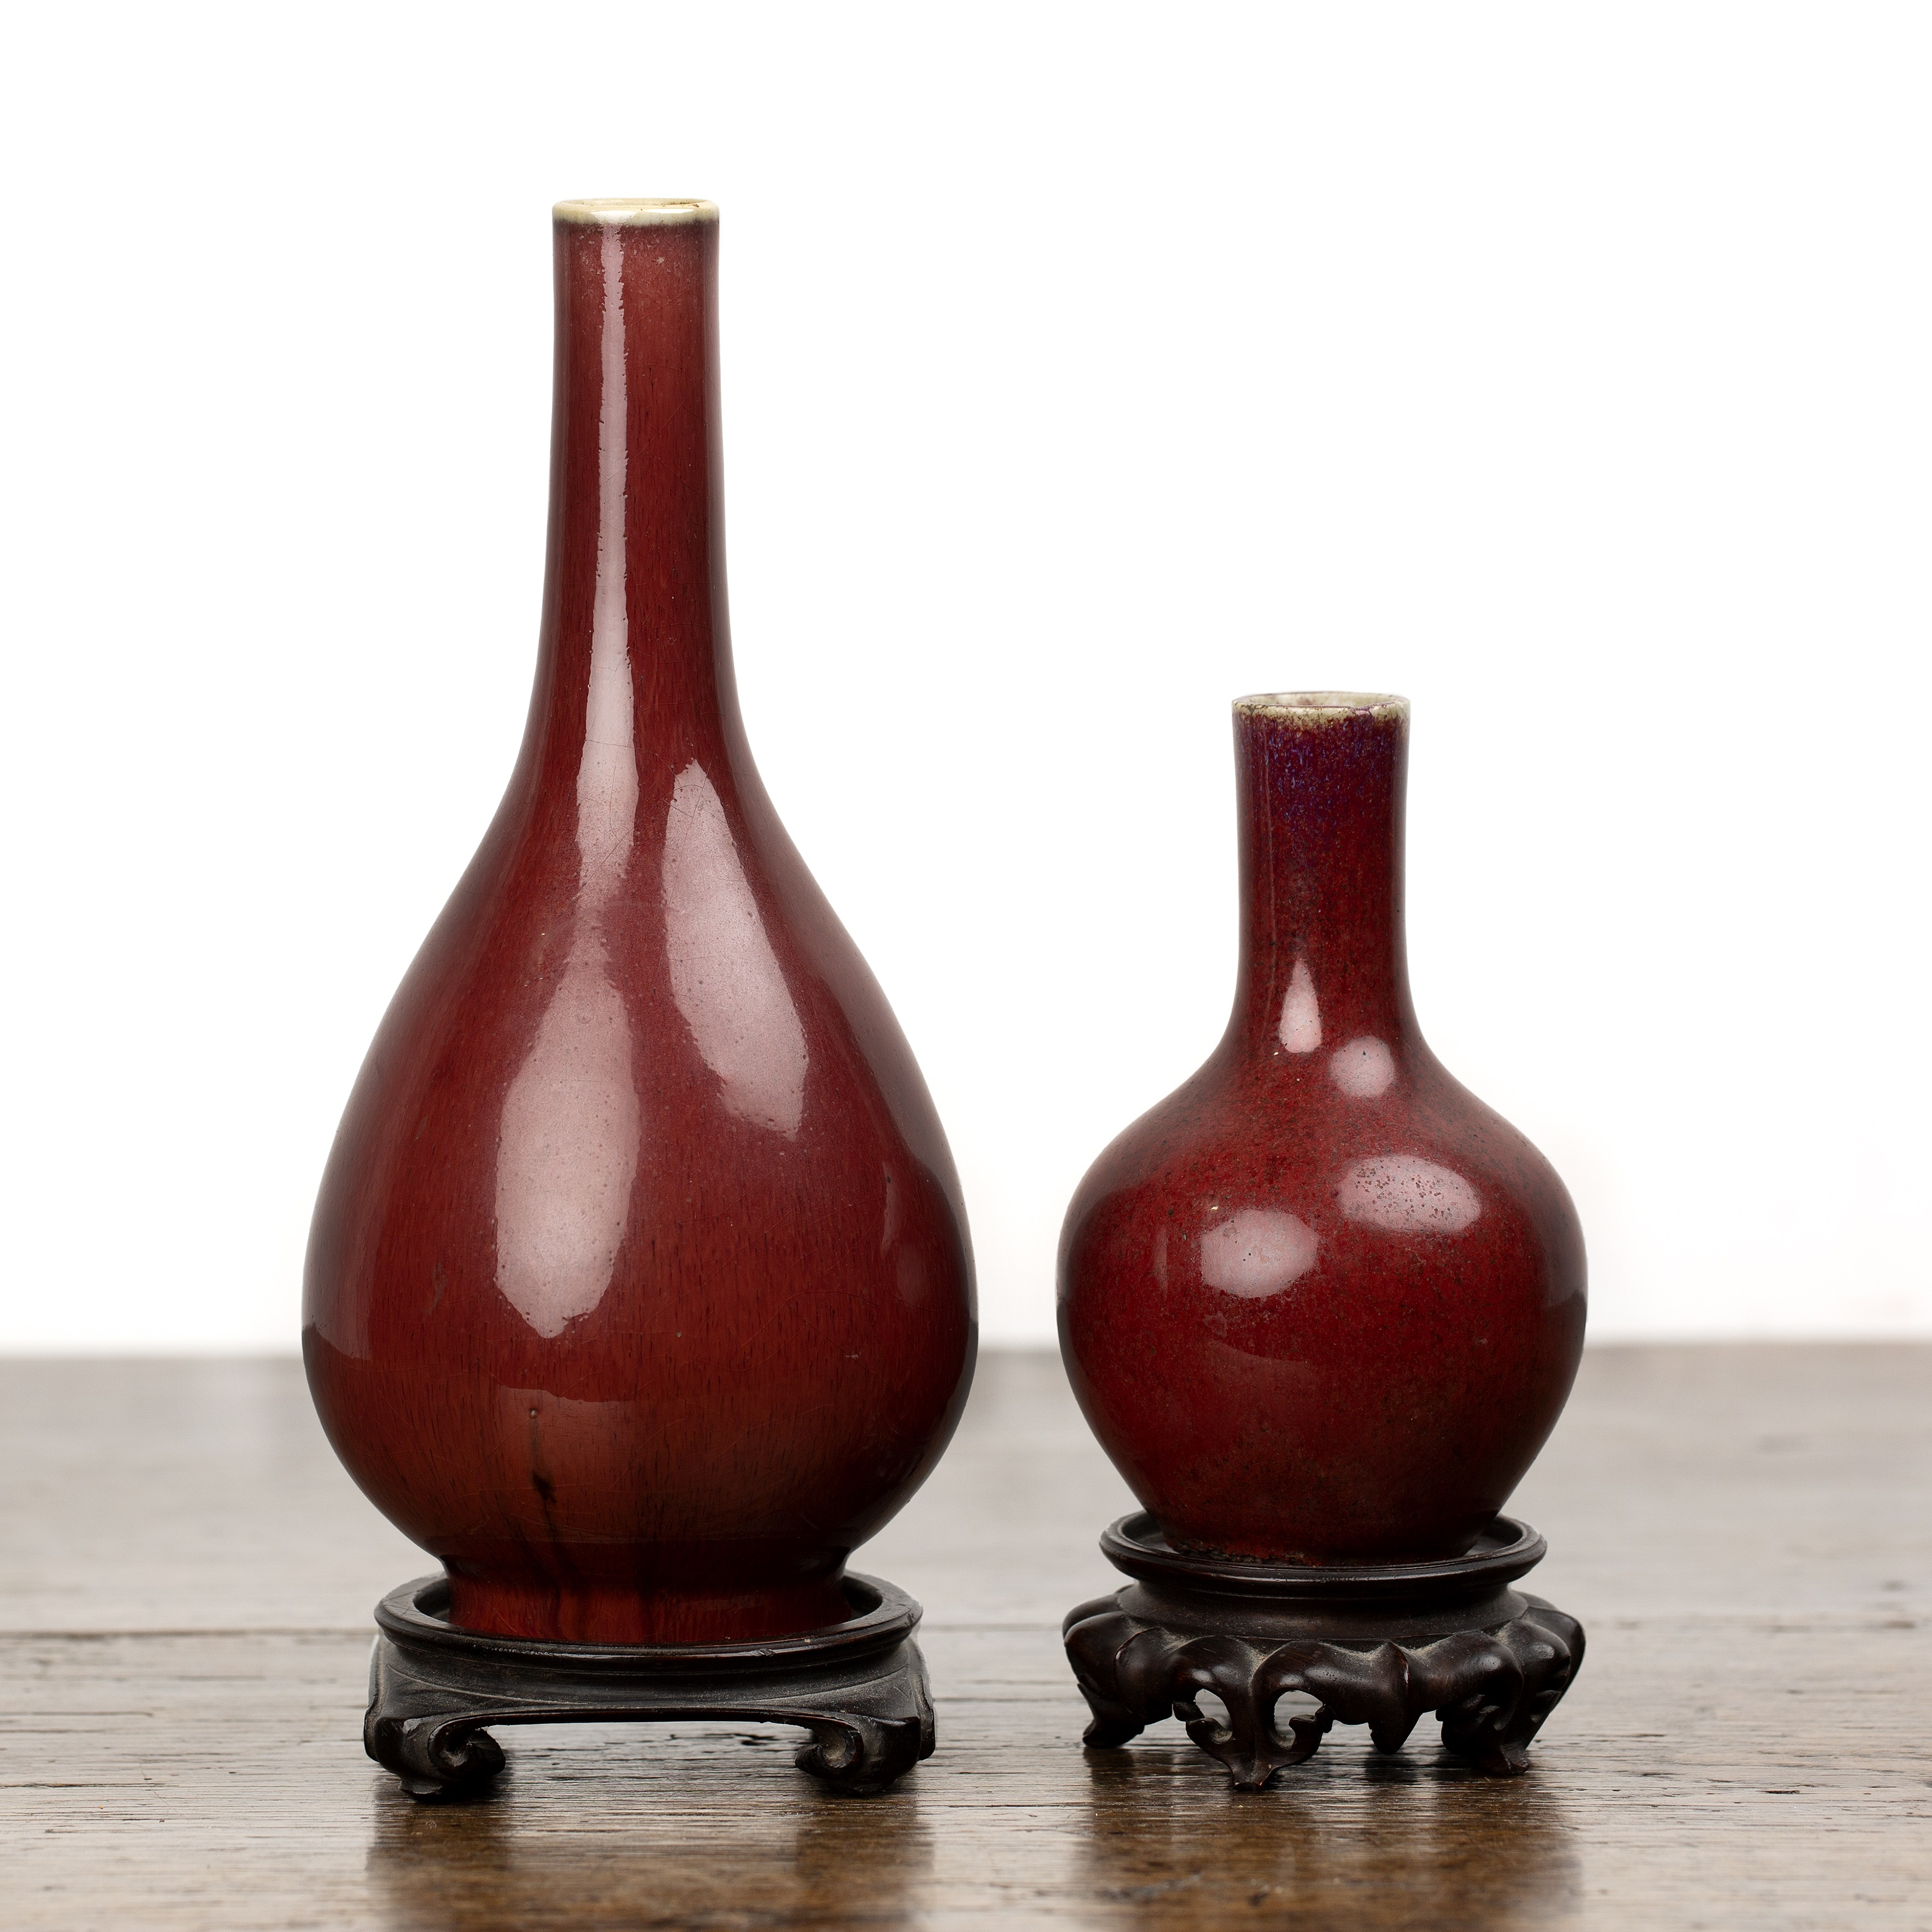 Two sang de boeuf vases on wooden stands Chinese, 18th/19th Century each of bottle vase form, 22.5cm